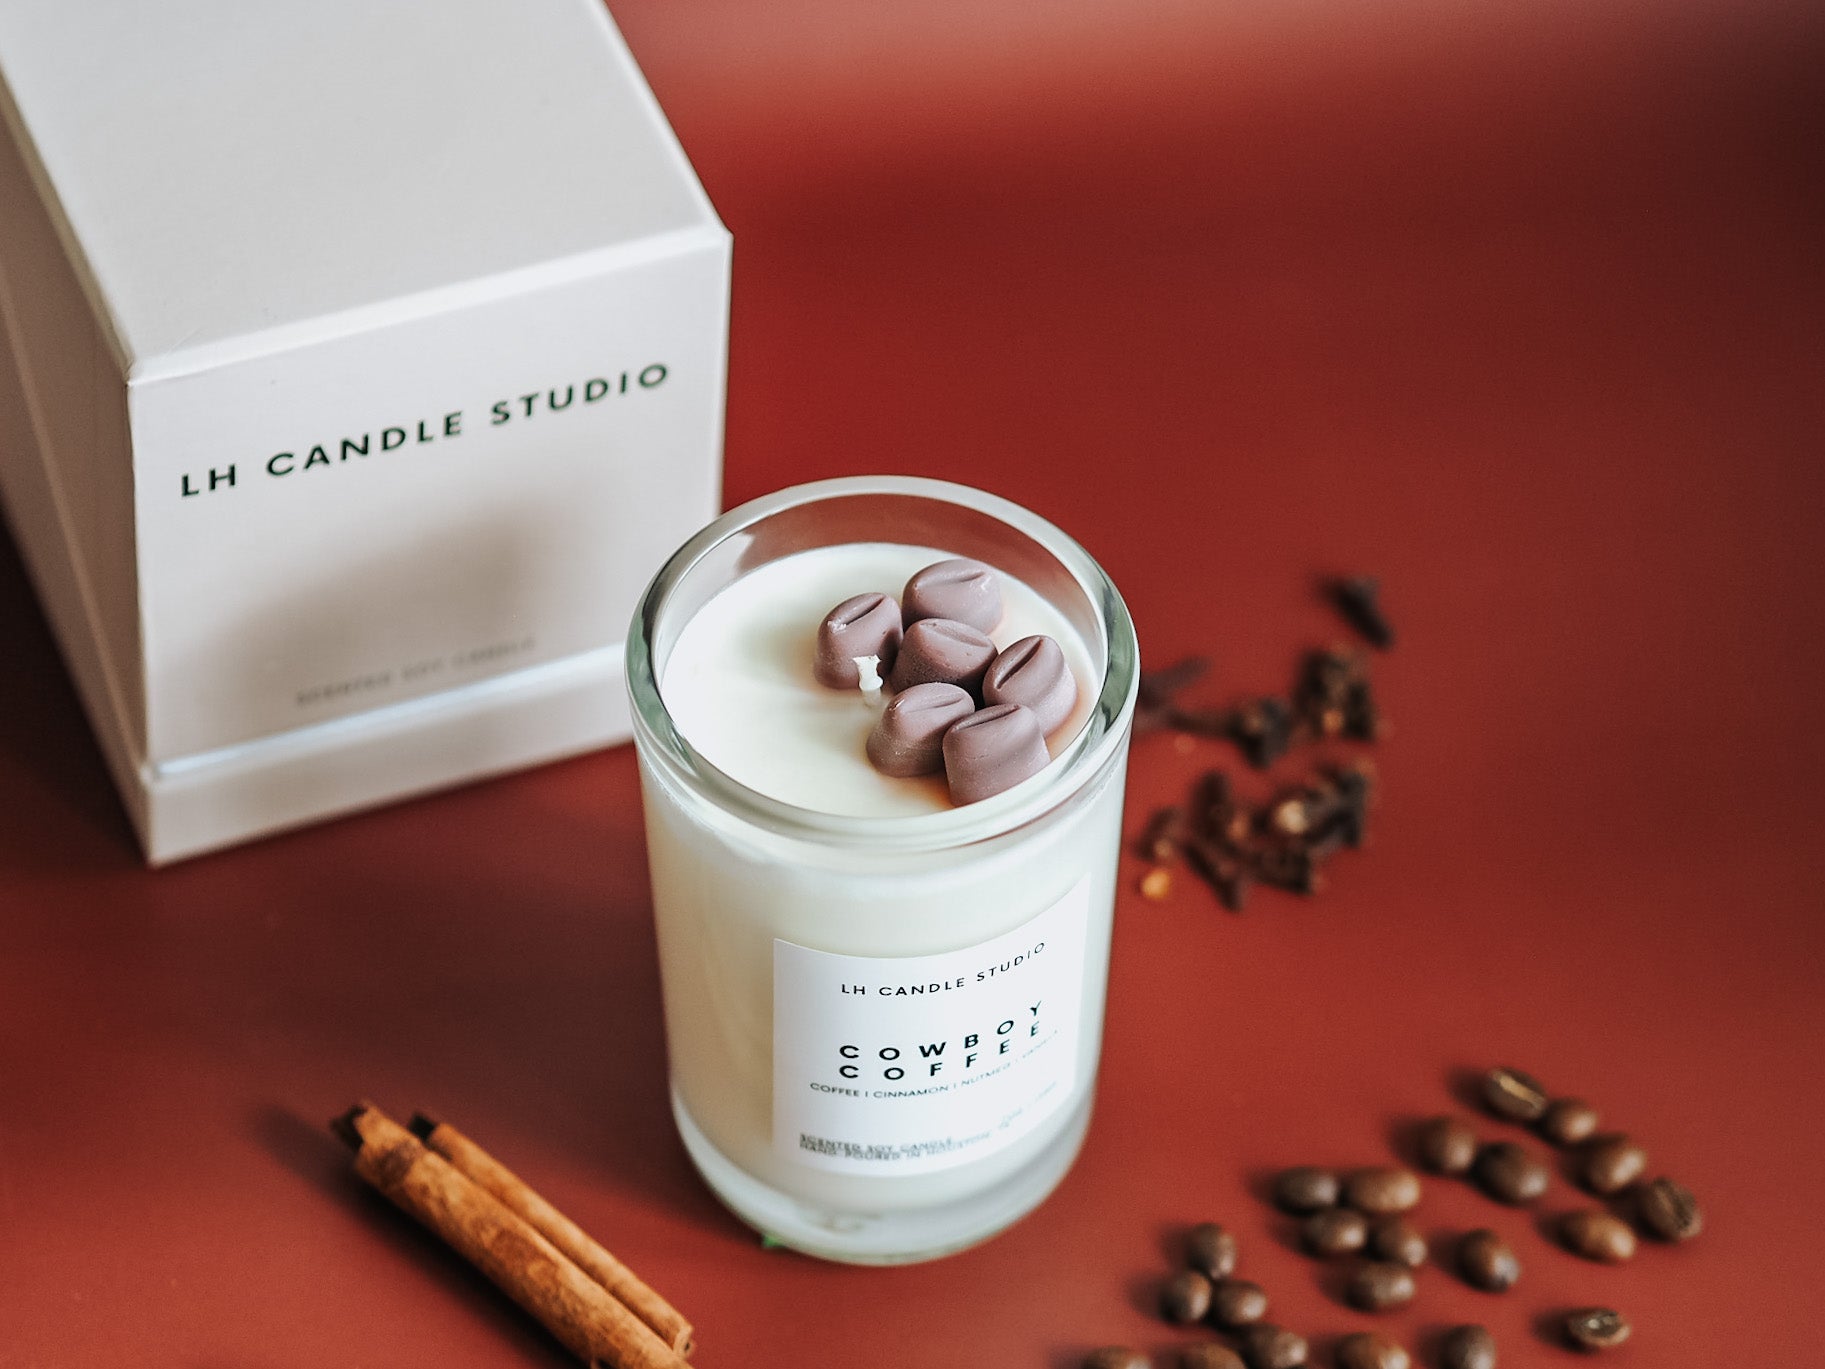 Cowboy Coffee Candle - LH CANDLE STUDIO